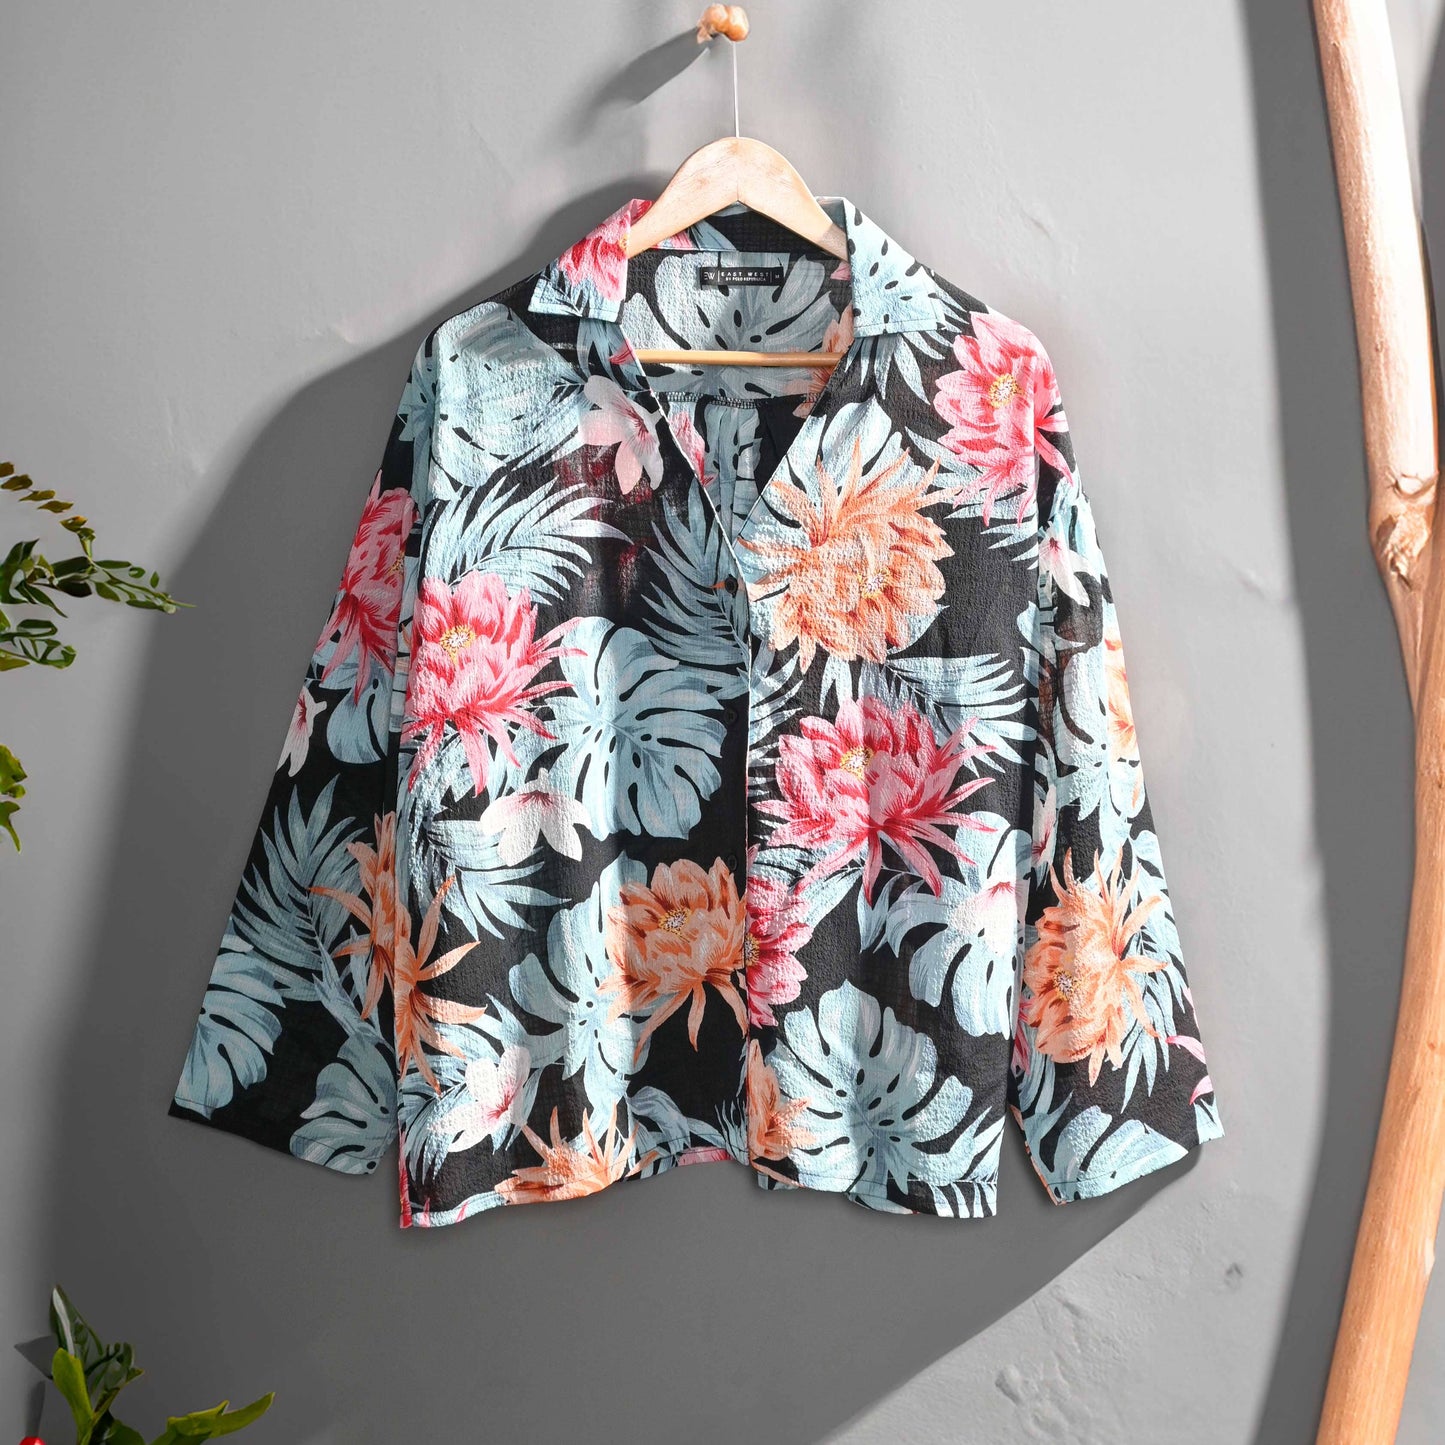 East West Women's Floral Printed Casual Top Women's Casual Top East West Black & Turquoise XS 